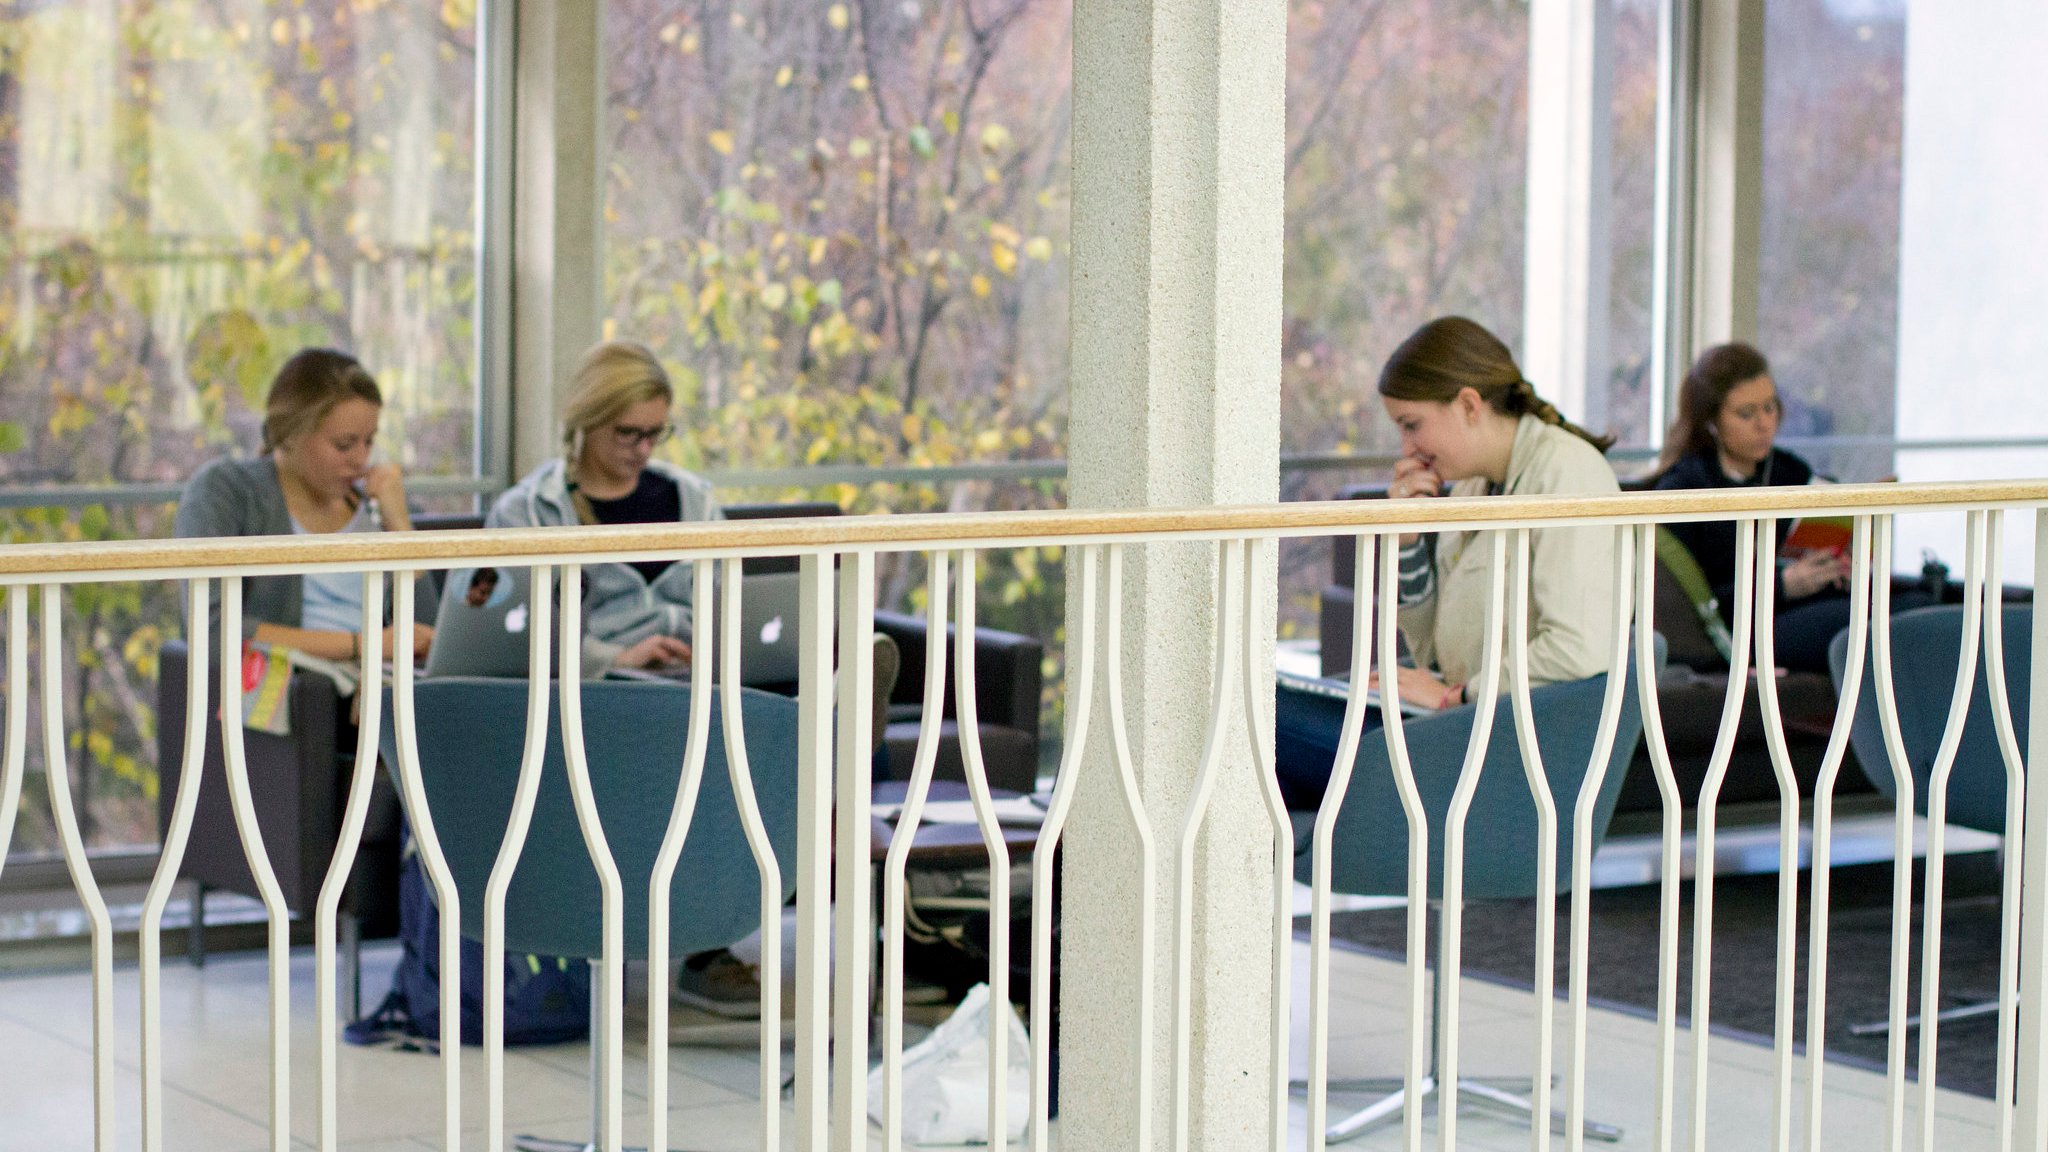 White gate and railing in front of group of students studying inside Irwin Library.